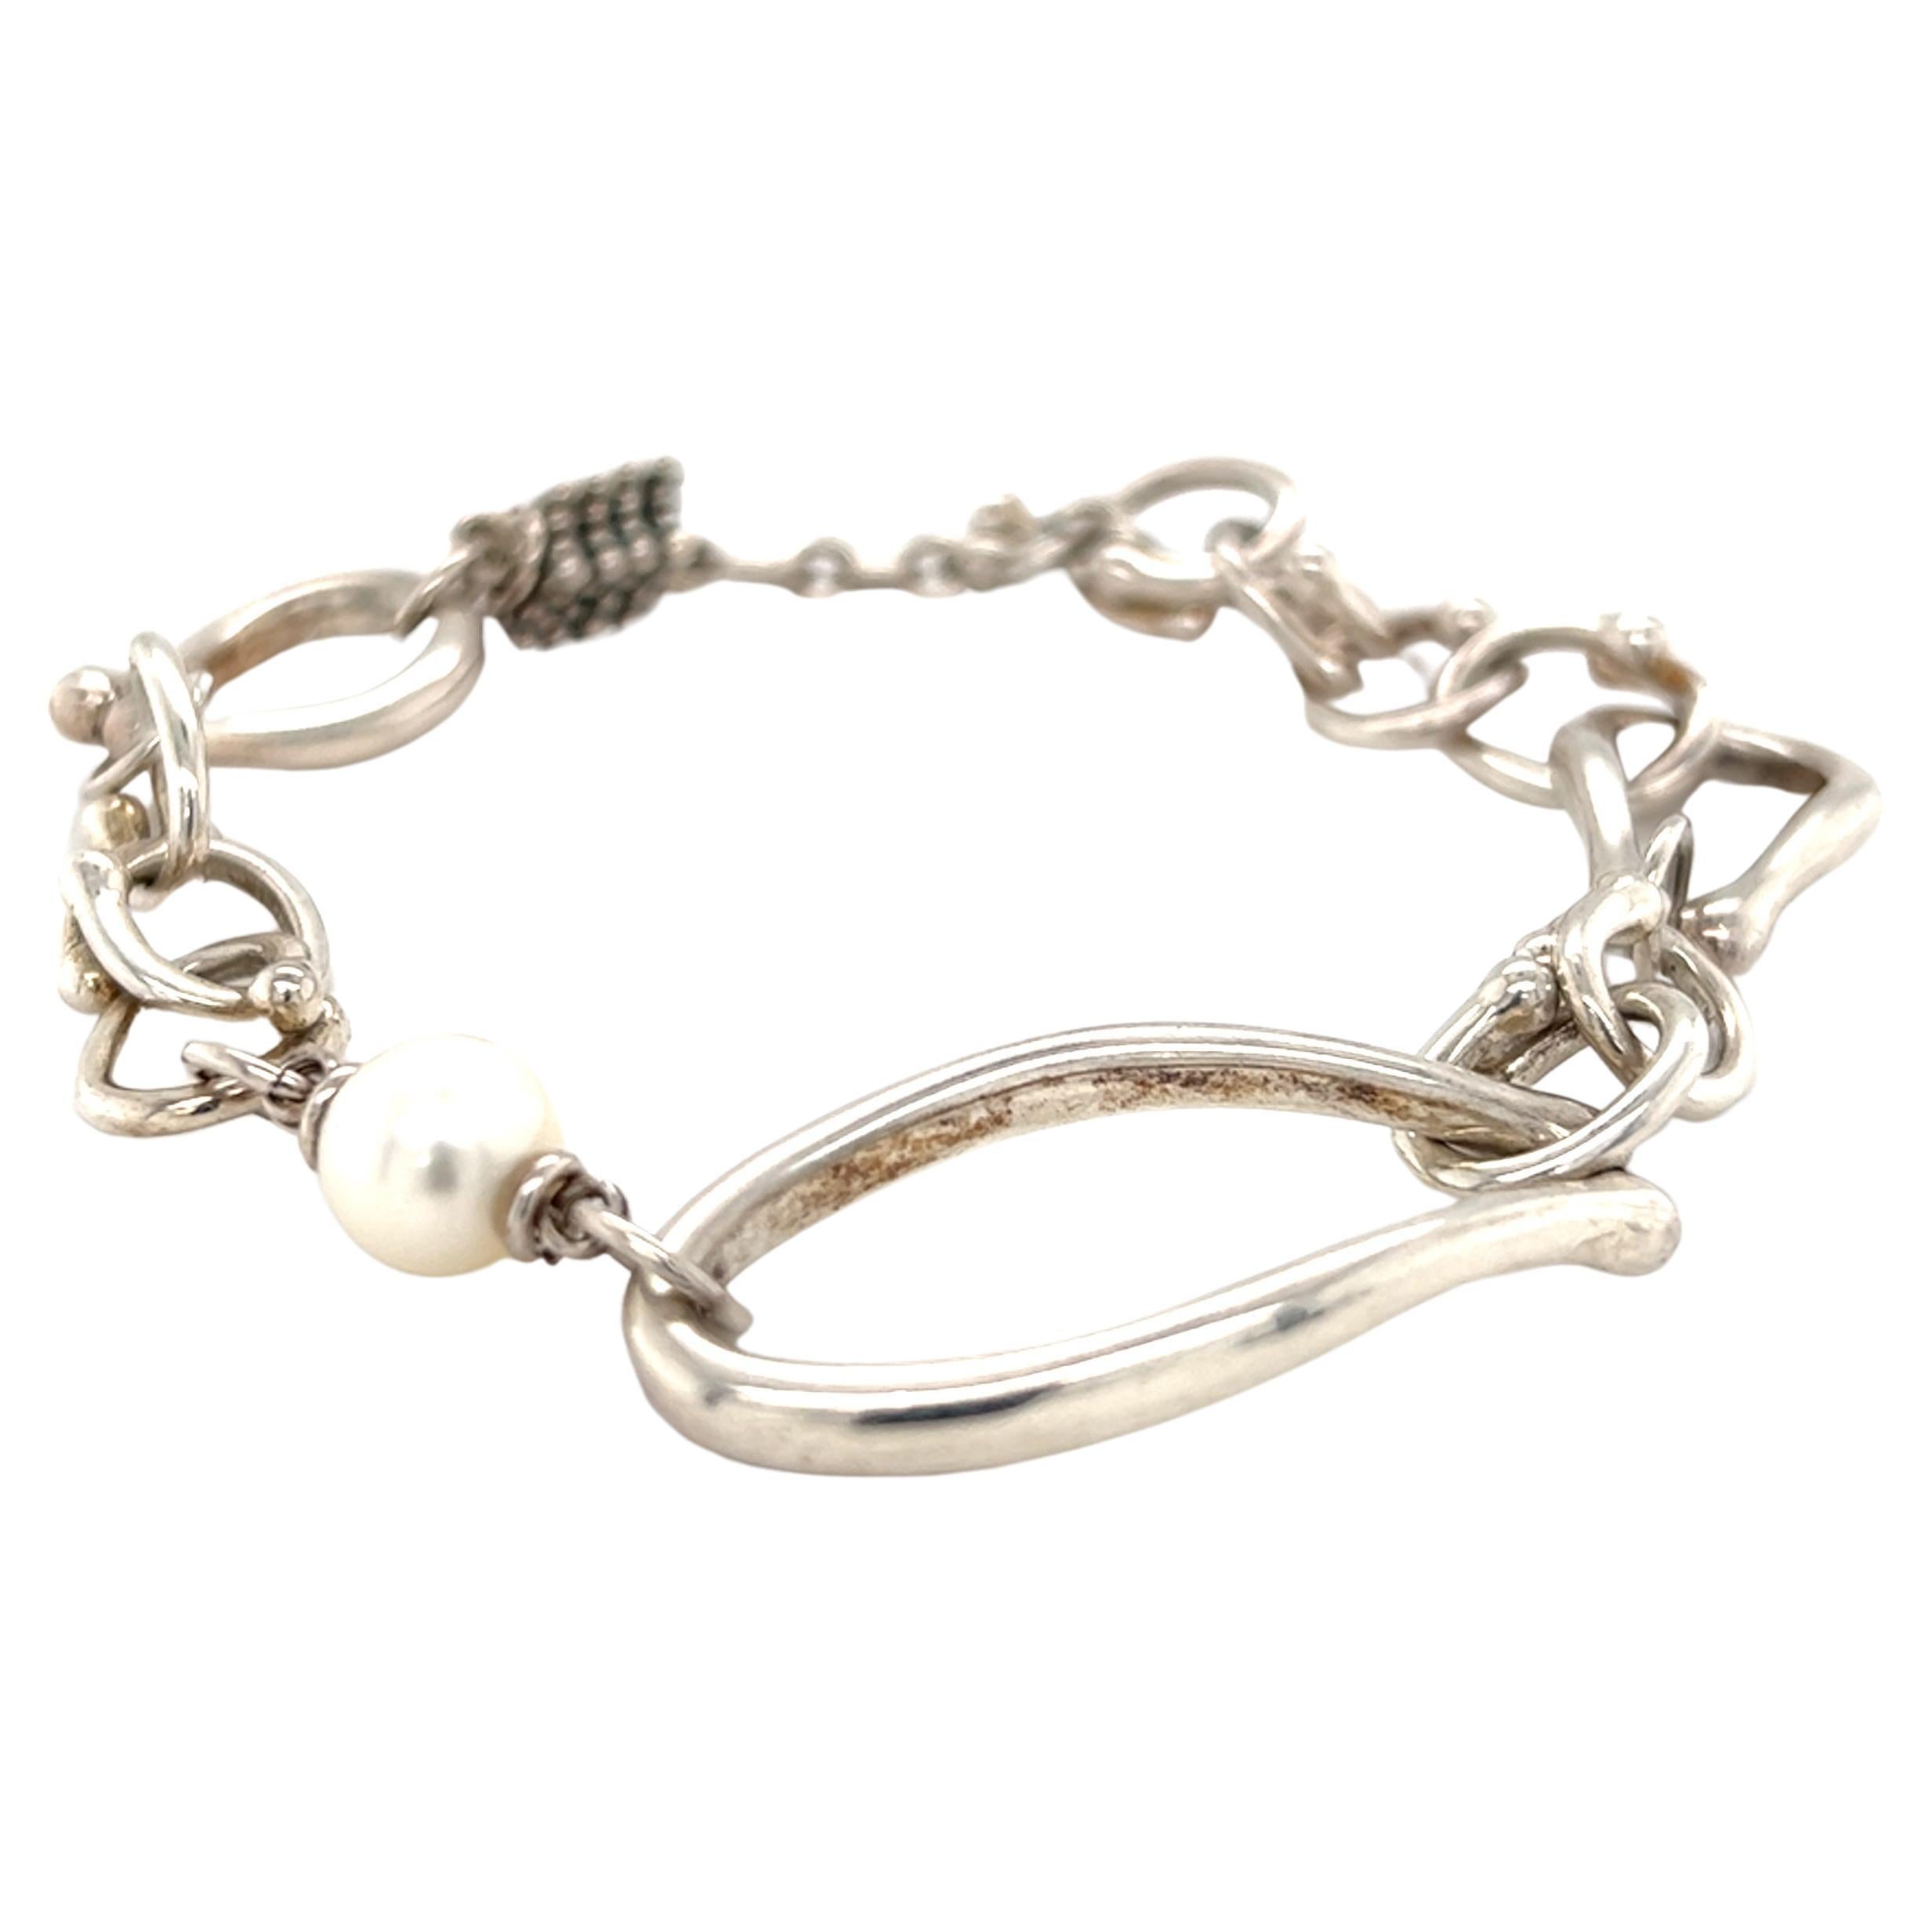 One sterling silver (stamped Michael Dawkins 925) multi-link bracelet set with one 7.9mm freshwater pearl.  The bracelet measures 8.5 inches long, weighs 23.9 grams, and is complete with a toggle closure.  